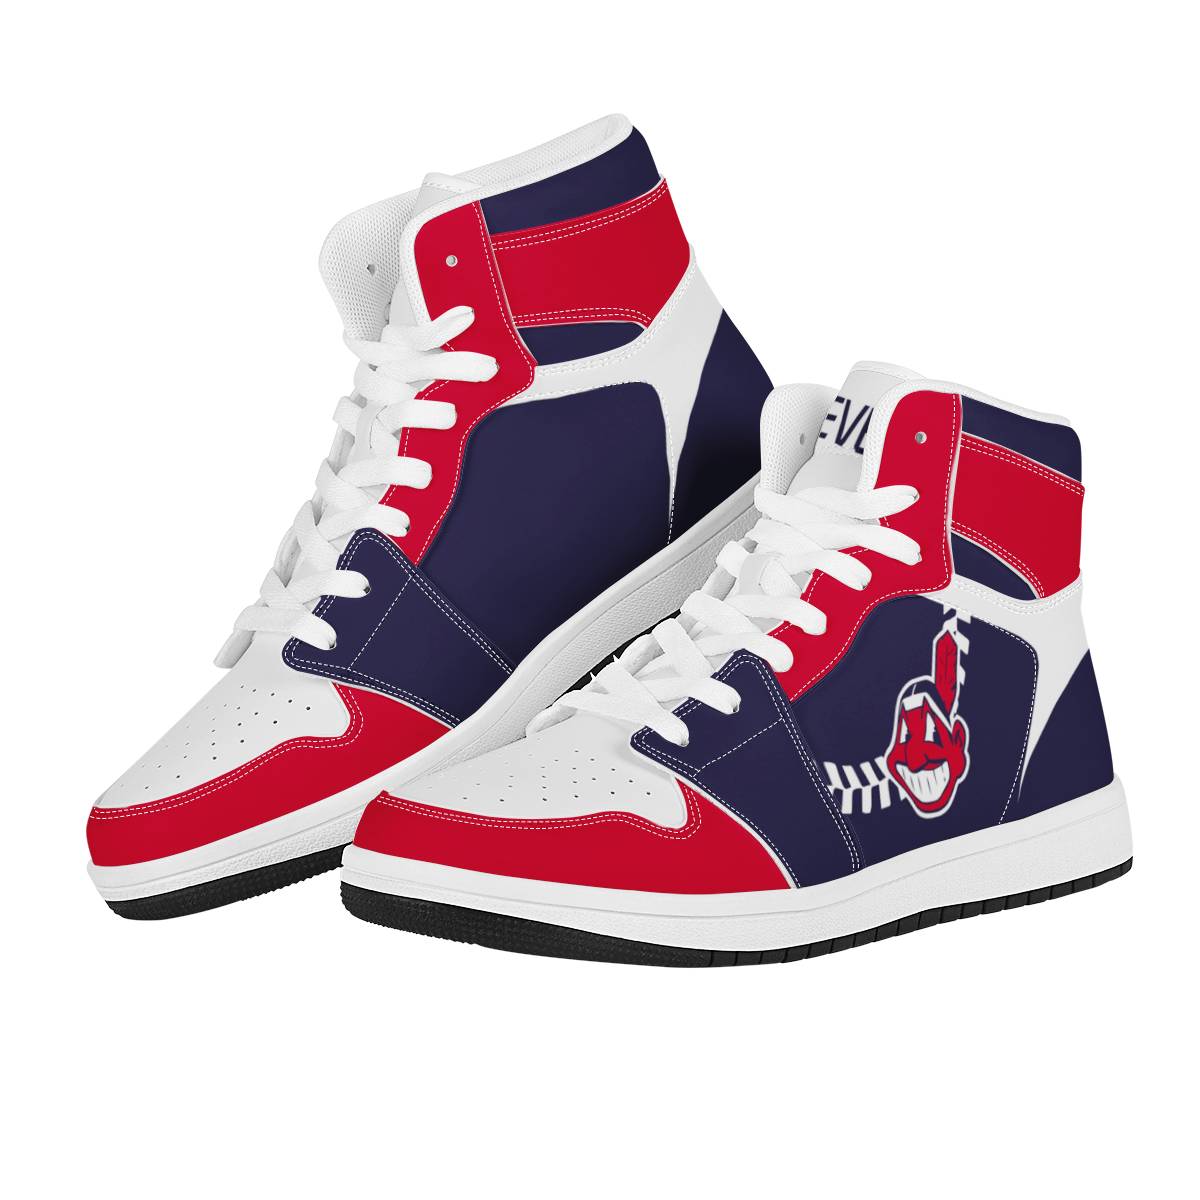 Men's Cleveland Indians High Top Leather AJ1 Sneakers 002